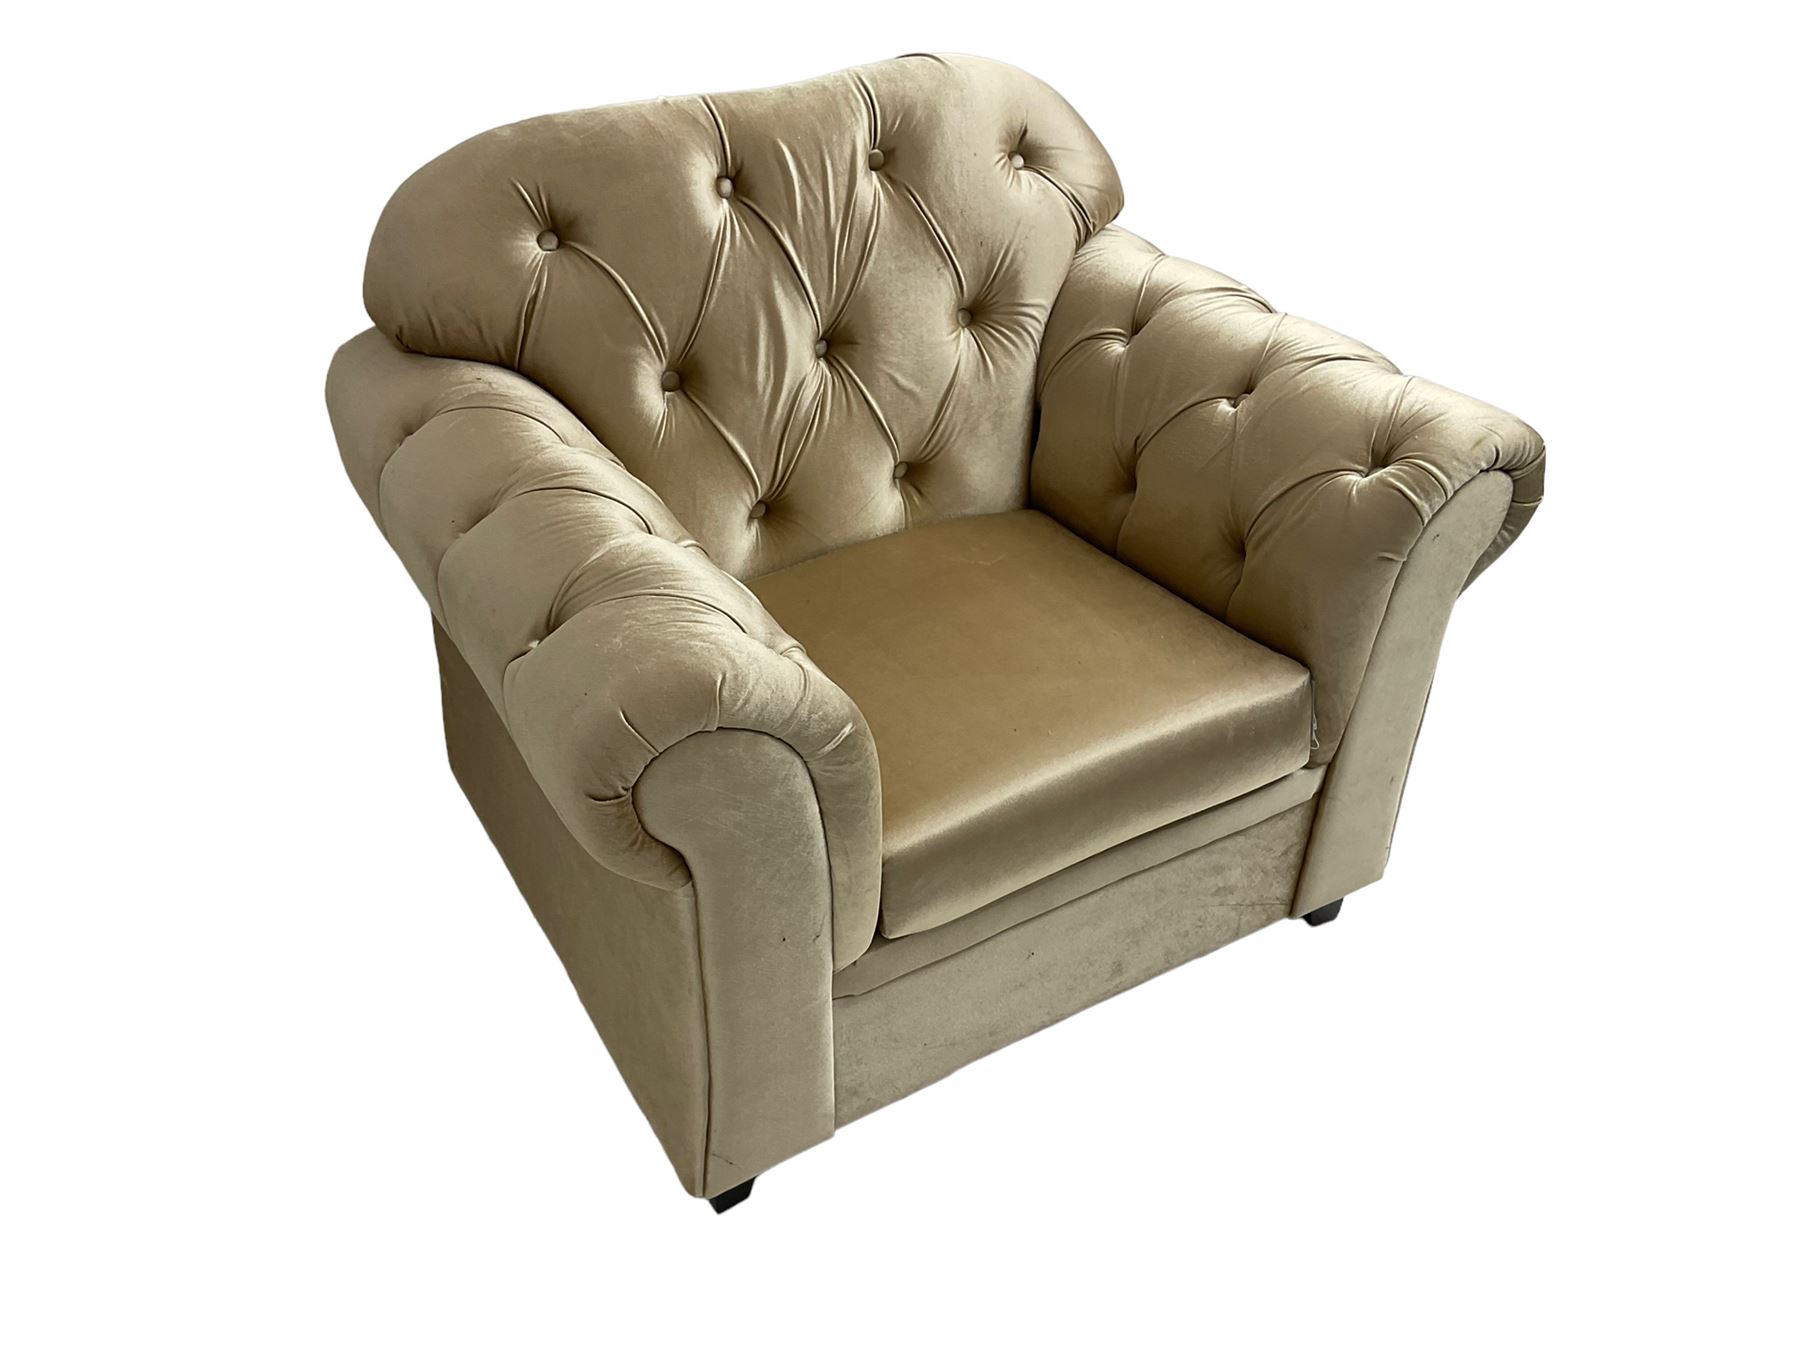 Chesterfield shaped armchair - Image 6 of 6